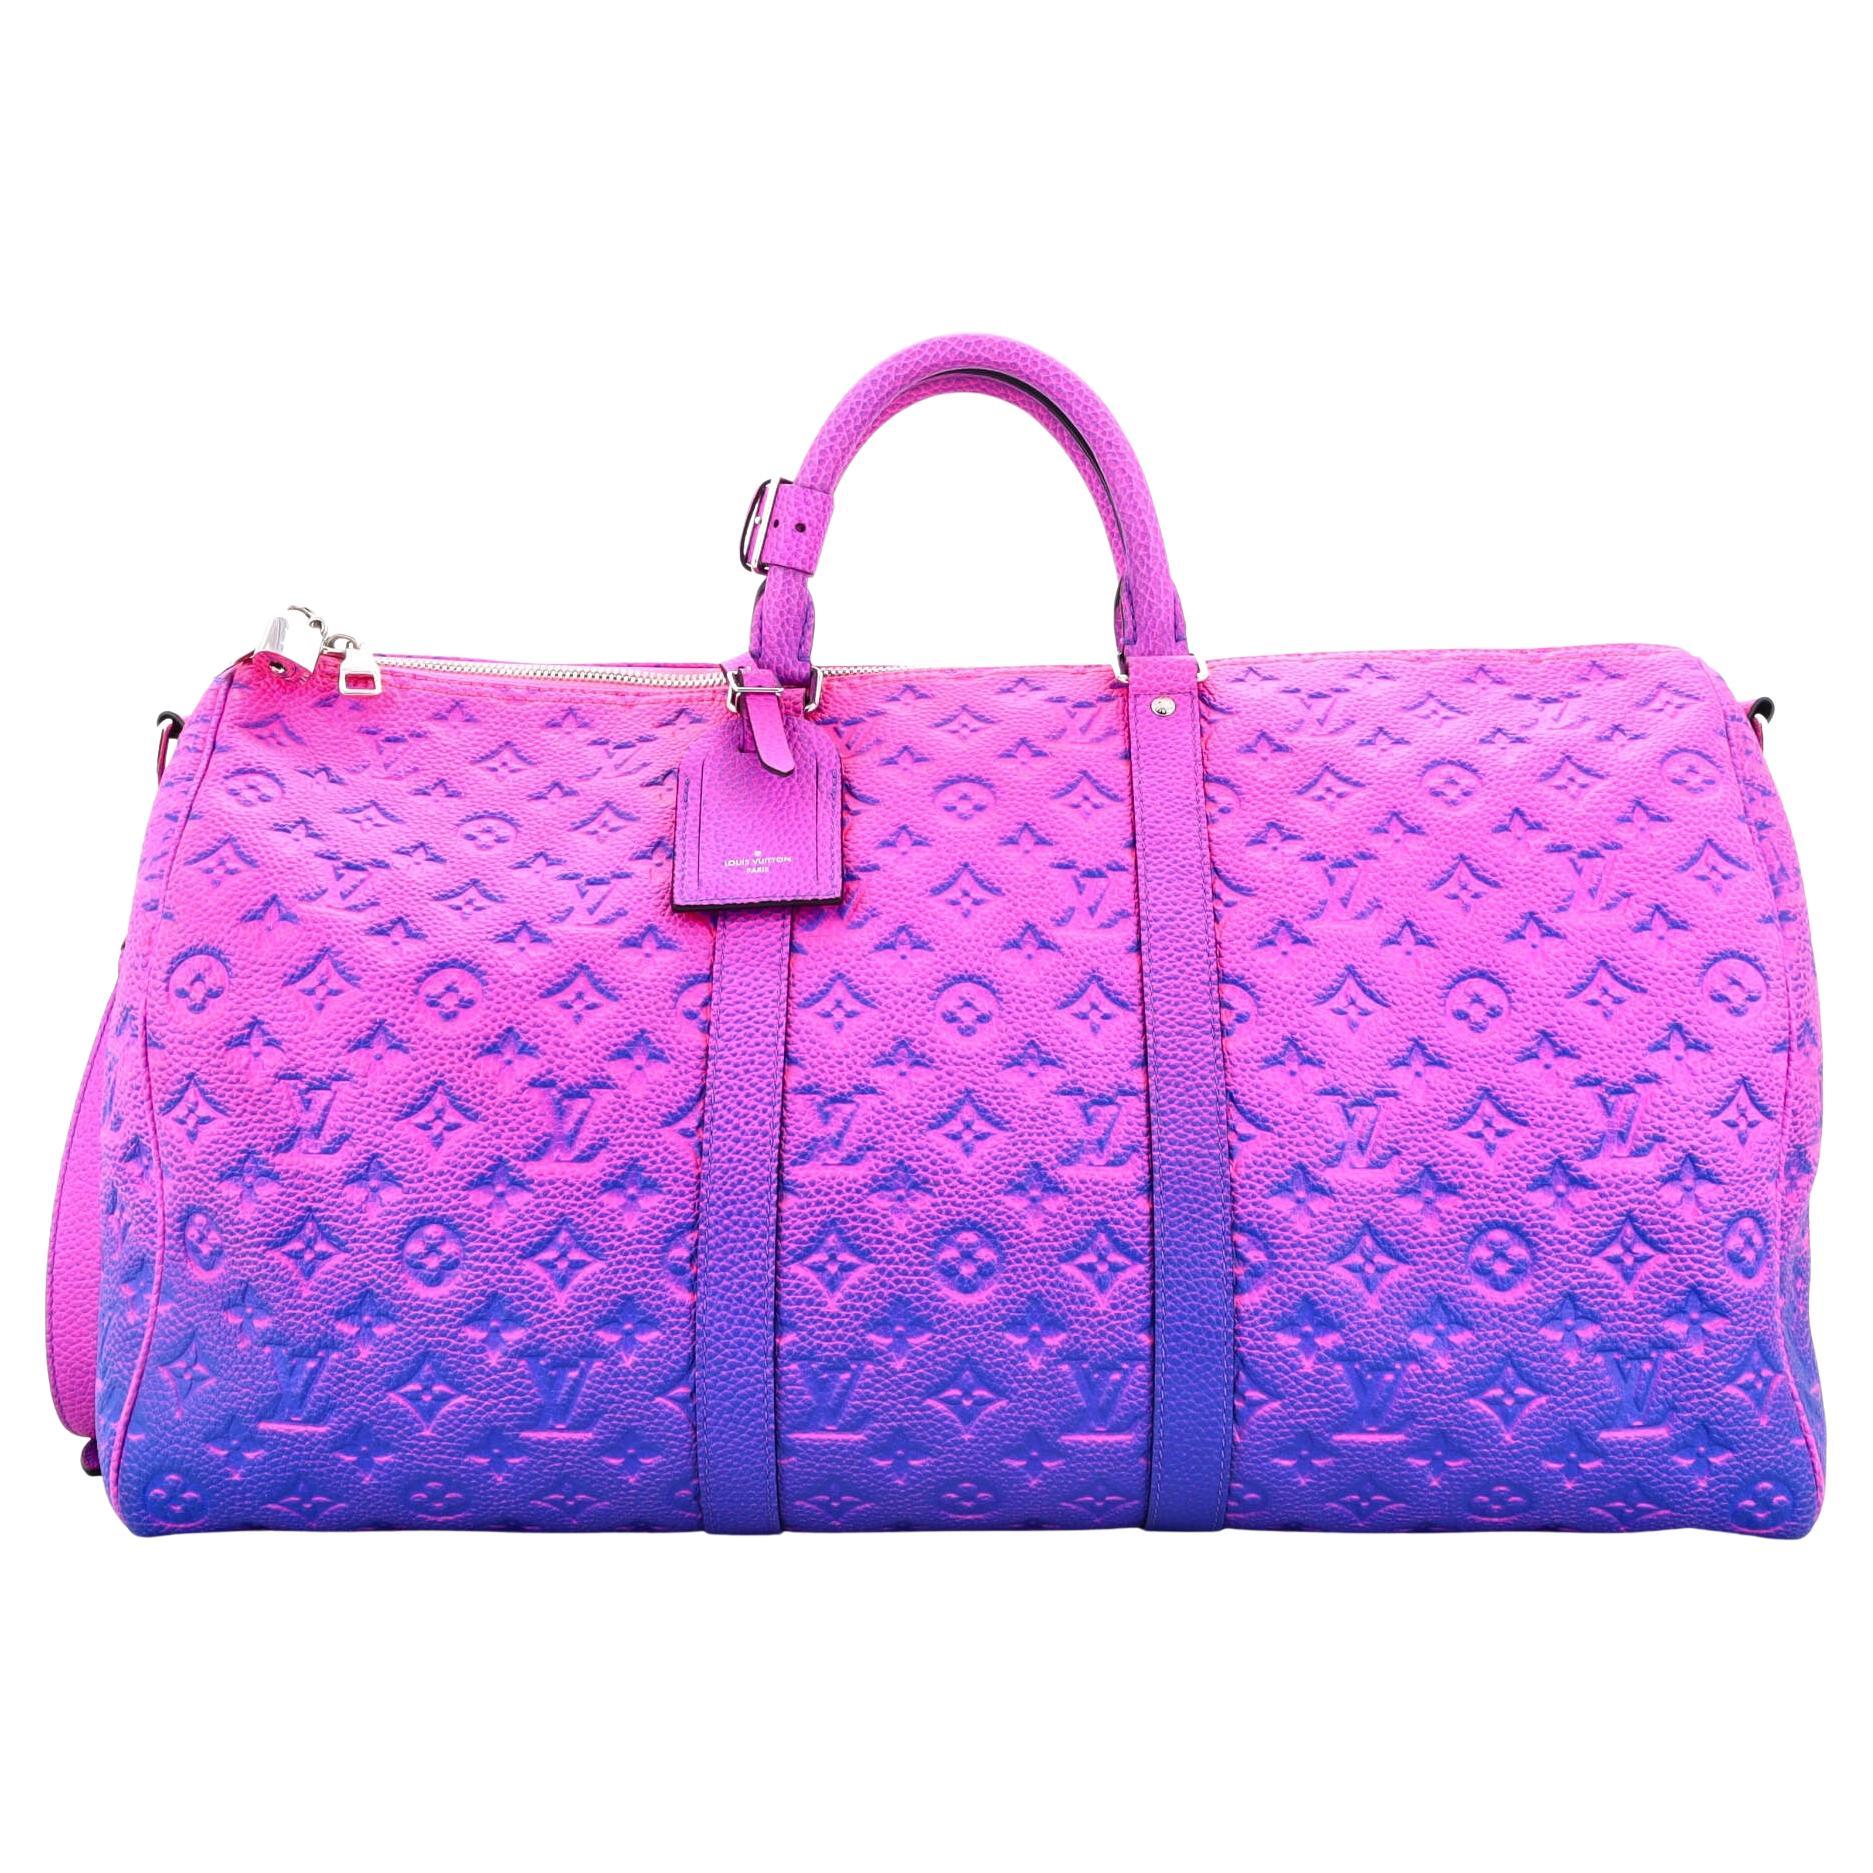 Louis Vuitton Keepall Bandouliere Bag Limited Edition Illusion Monogram For Sale